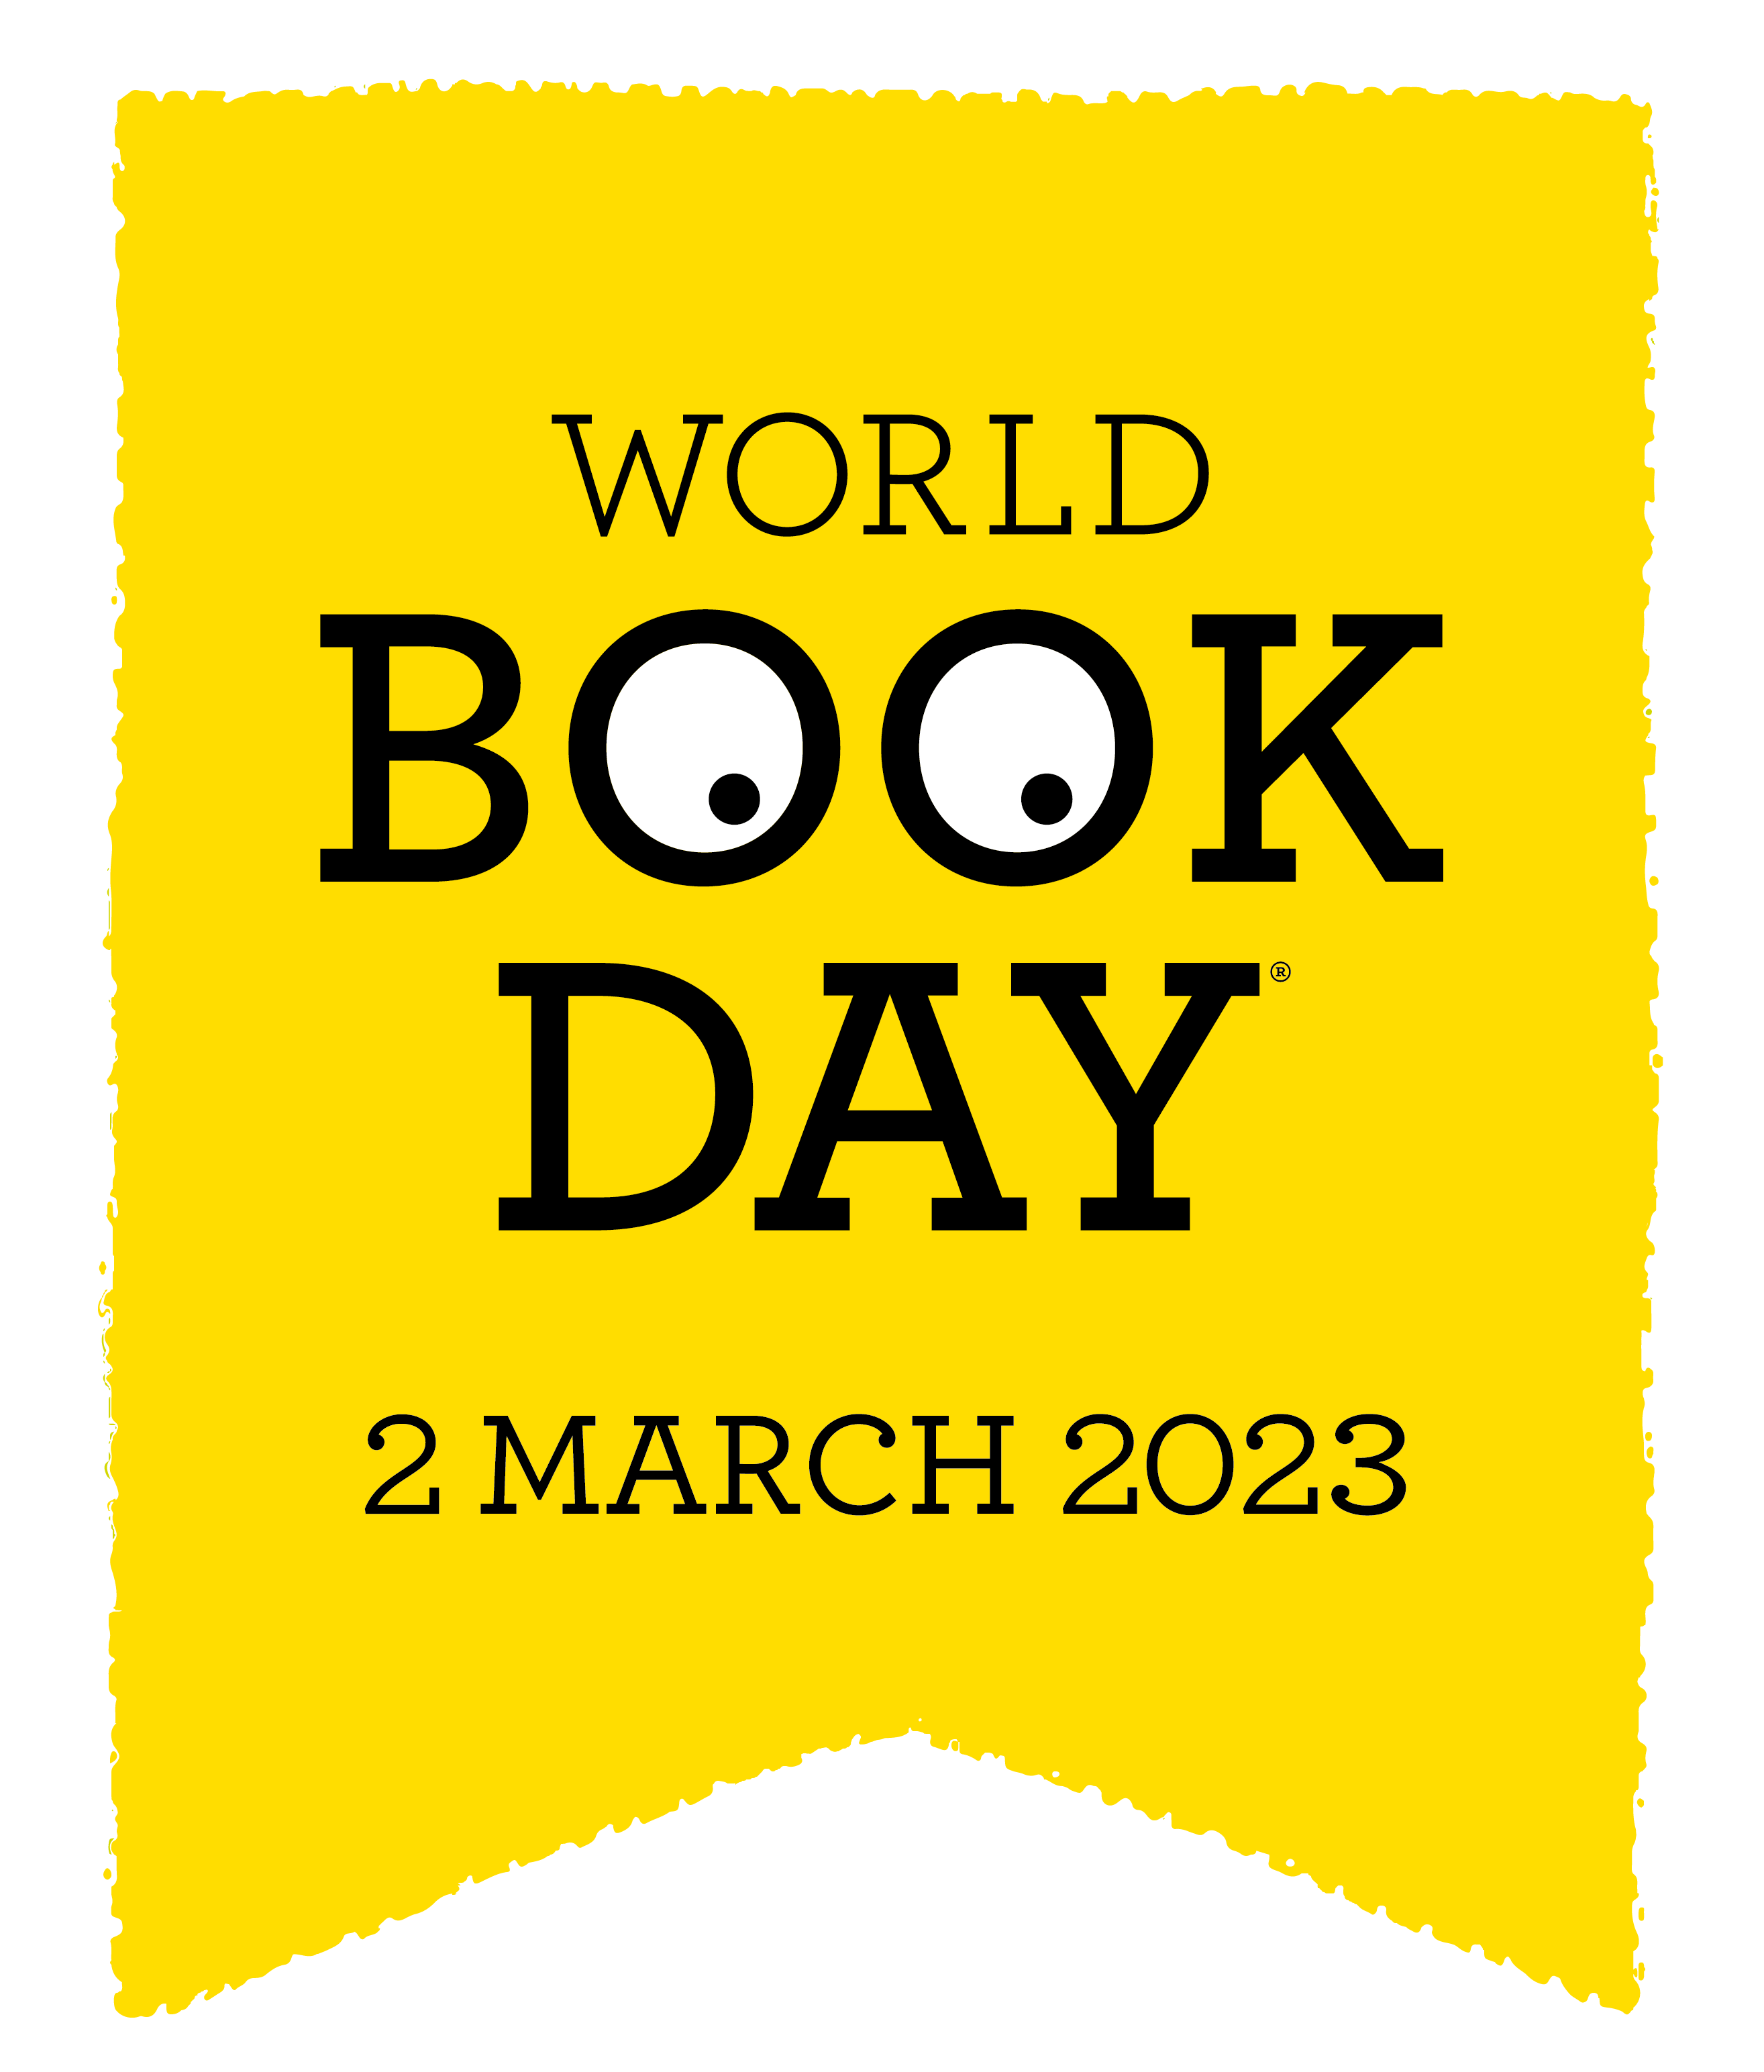 World Book Day - World Book Day | World Book Day is a registered charity.  Our mission is to give every child and young person a book of their own.